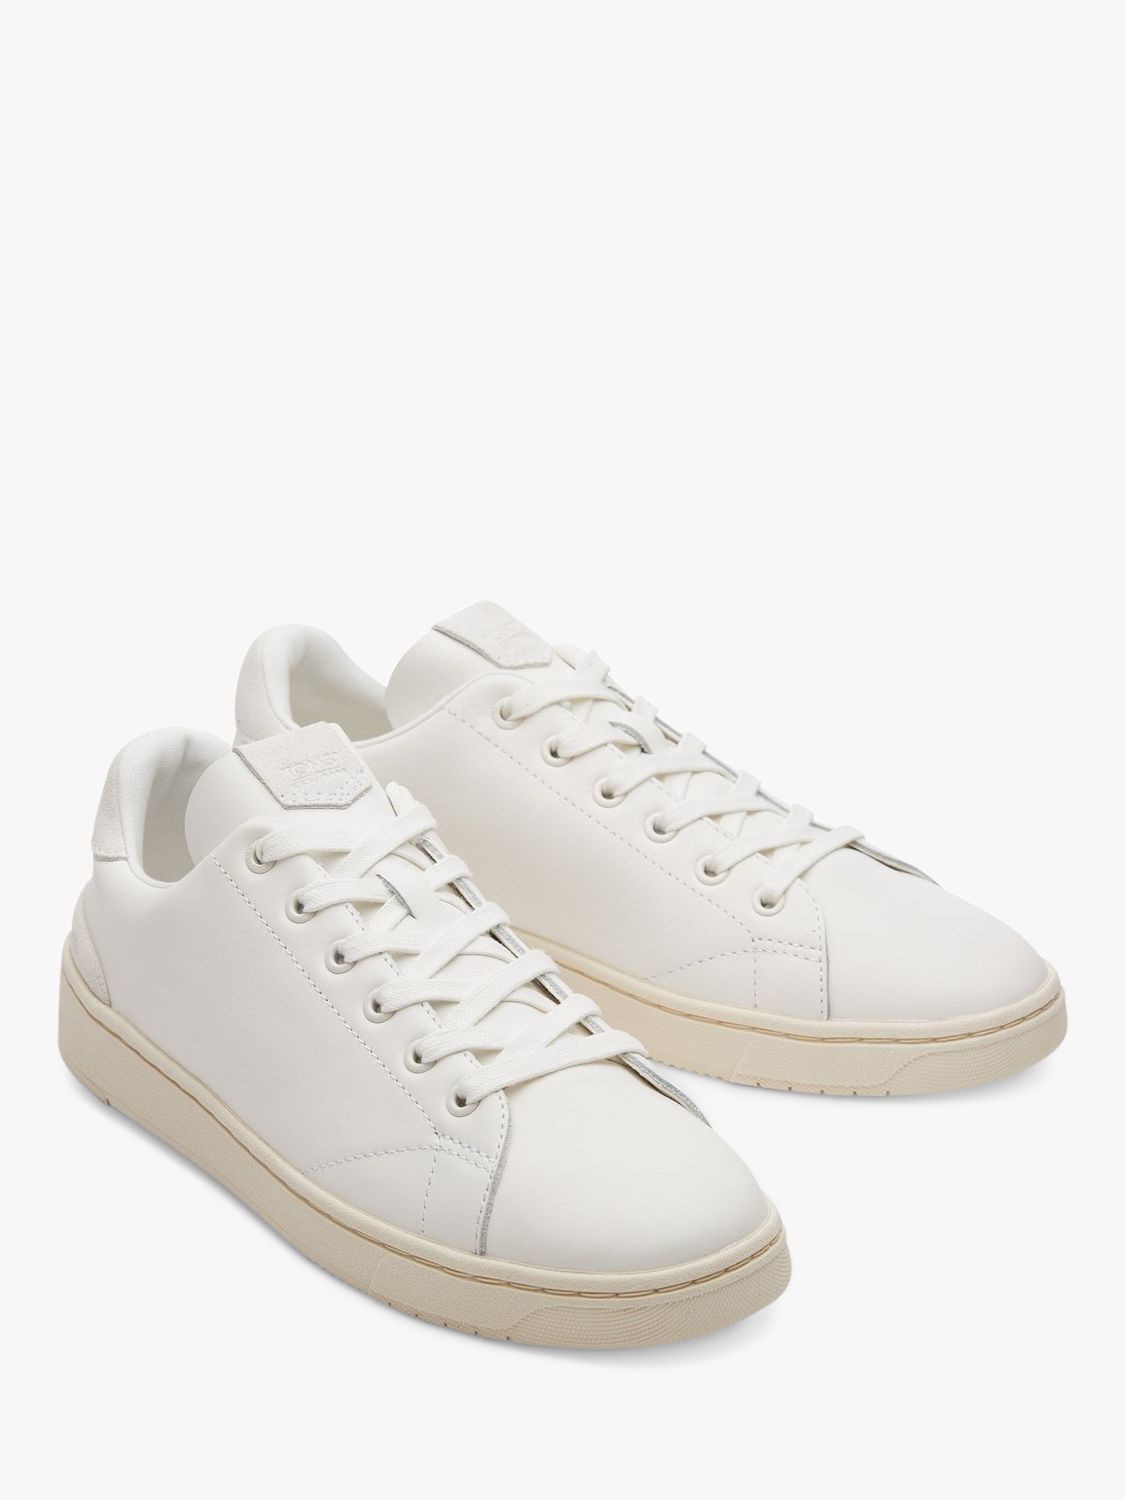 TOMS Travel Lite 2.0 Low Top Leather Trainers, Porcelain/Fog Grey at ...